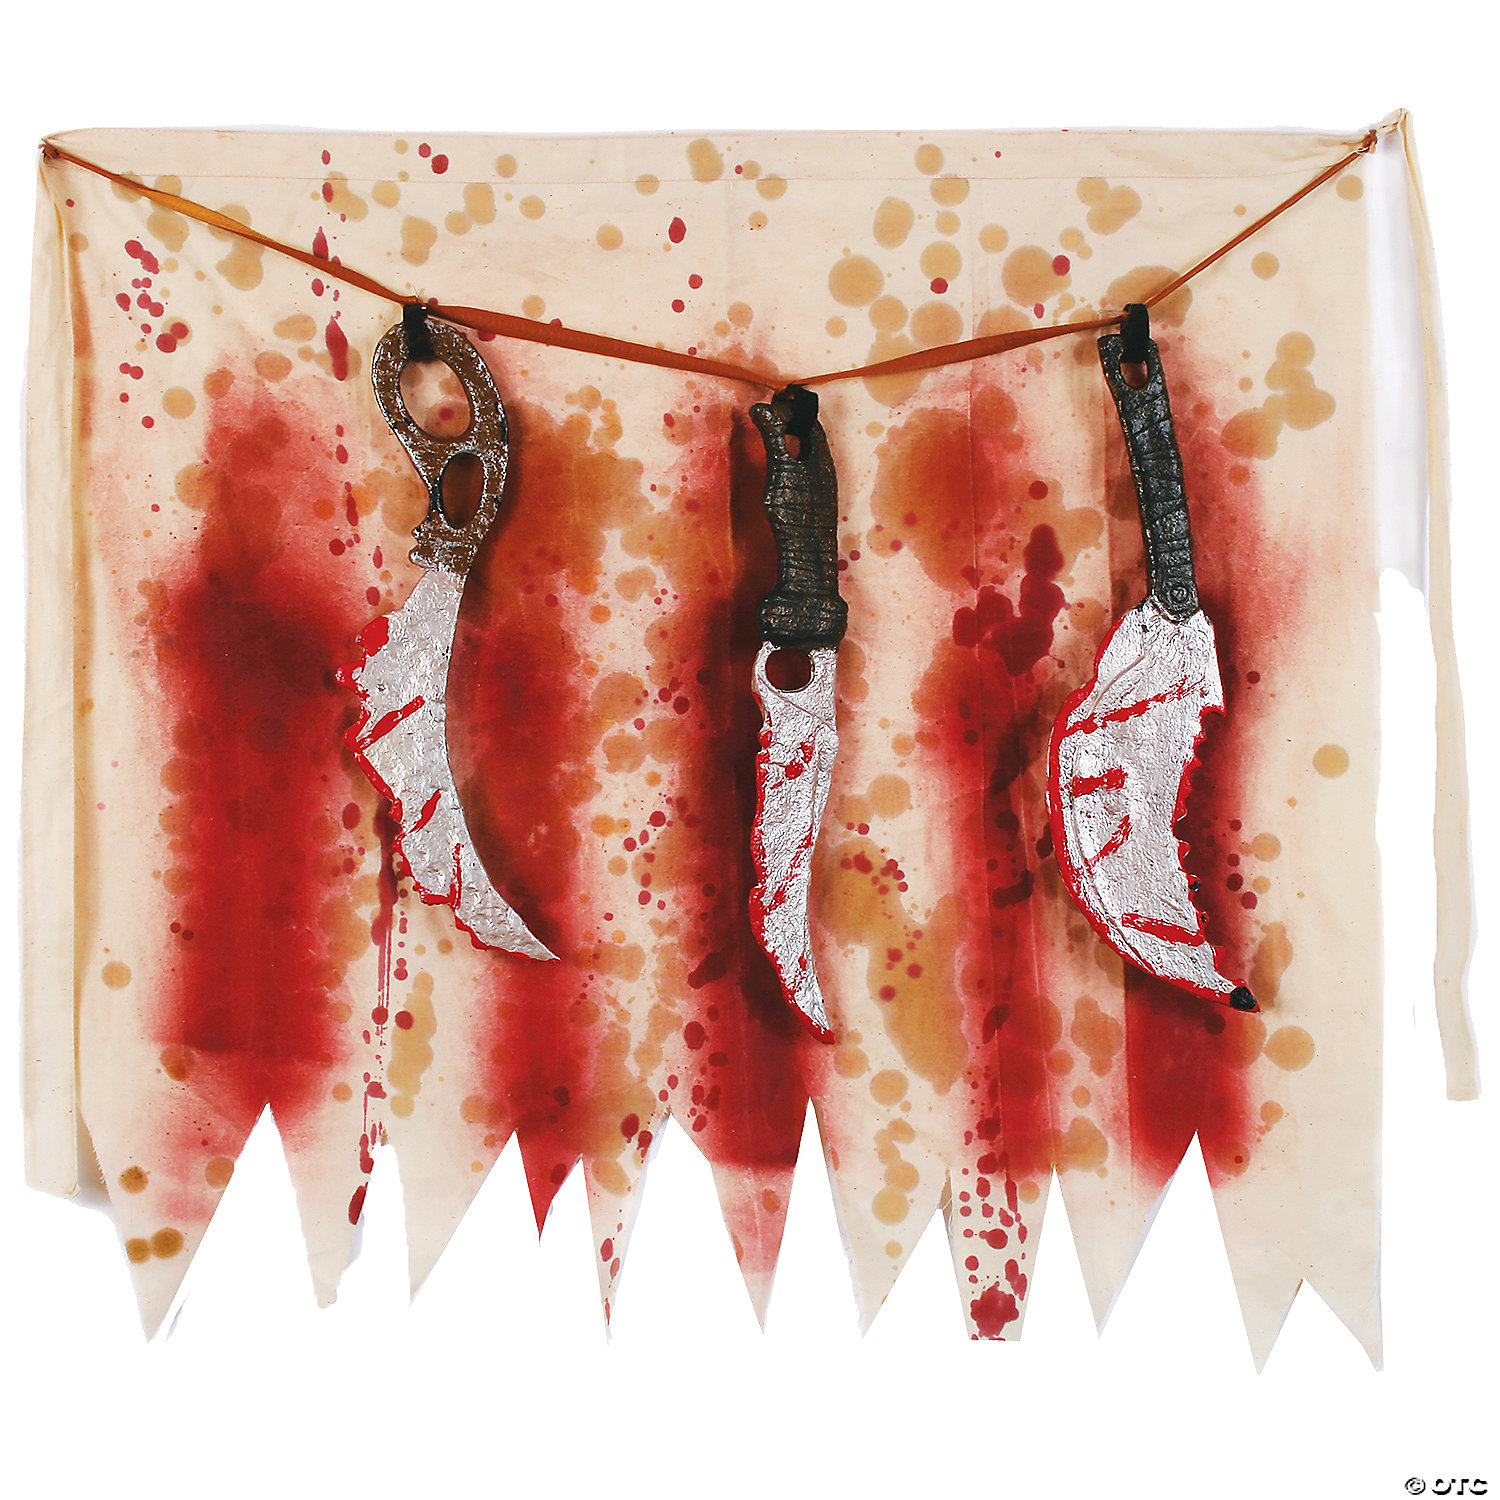 BUTCHER APRON WITH KNIVES - HALLOWEEN